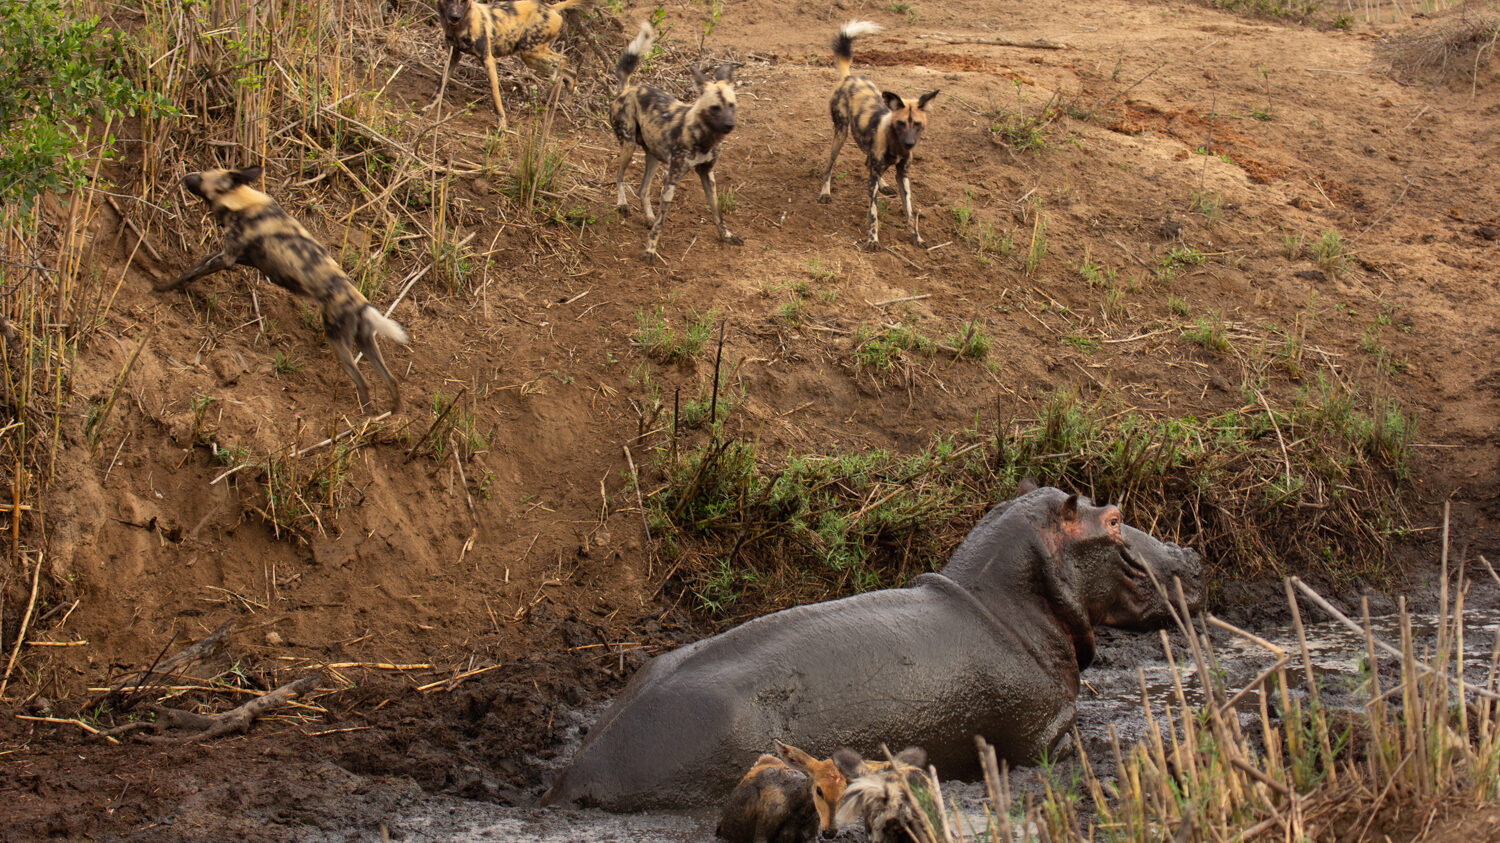 Hippo Crushes Buck That's Stuck in Mud After Wild Dogs Chased It